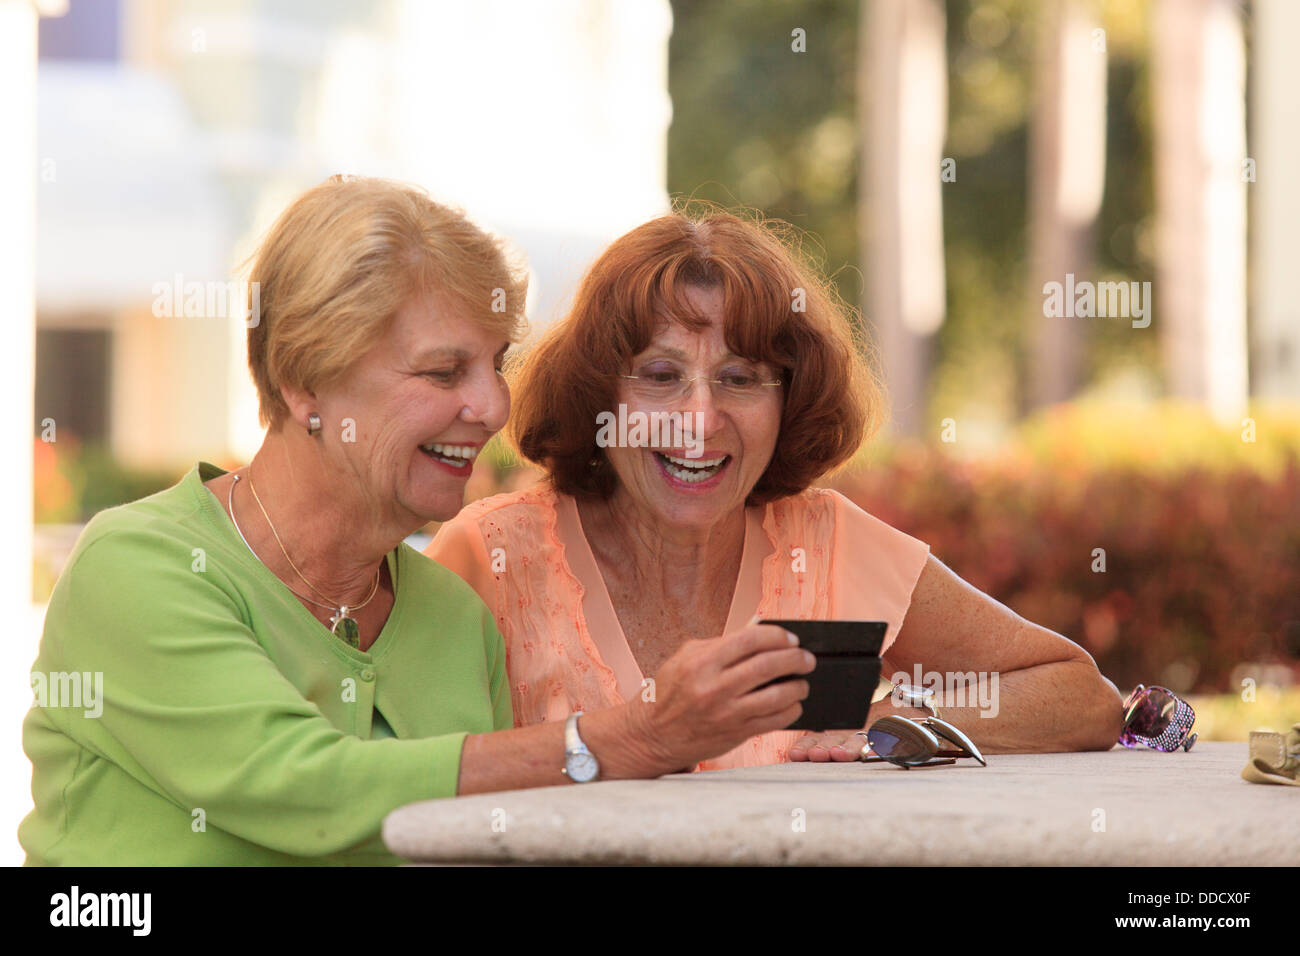 Senior friends looking at a smart phone and smiling Stock Photo